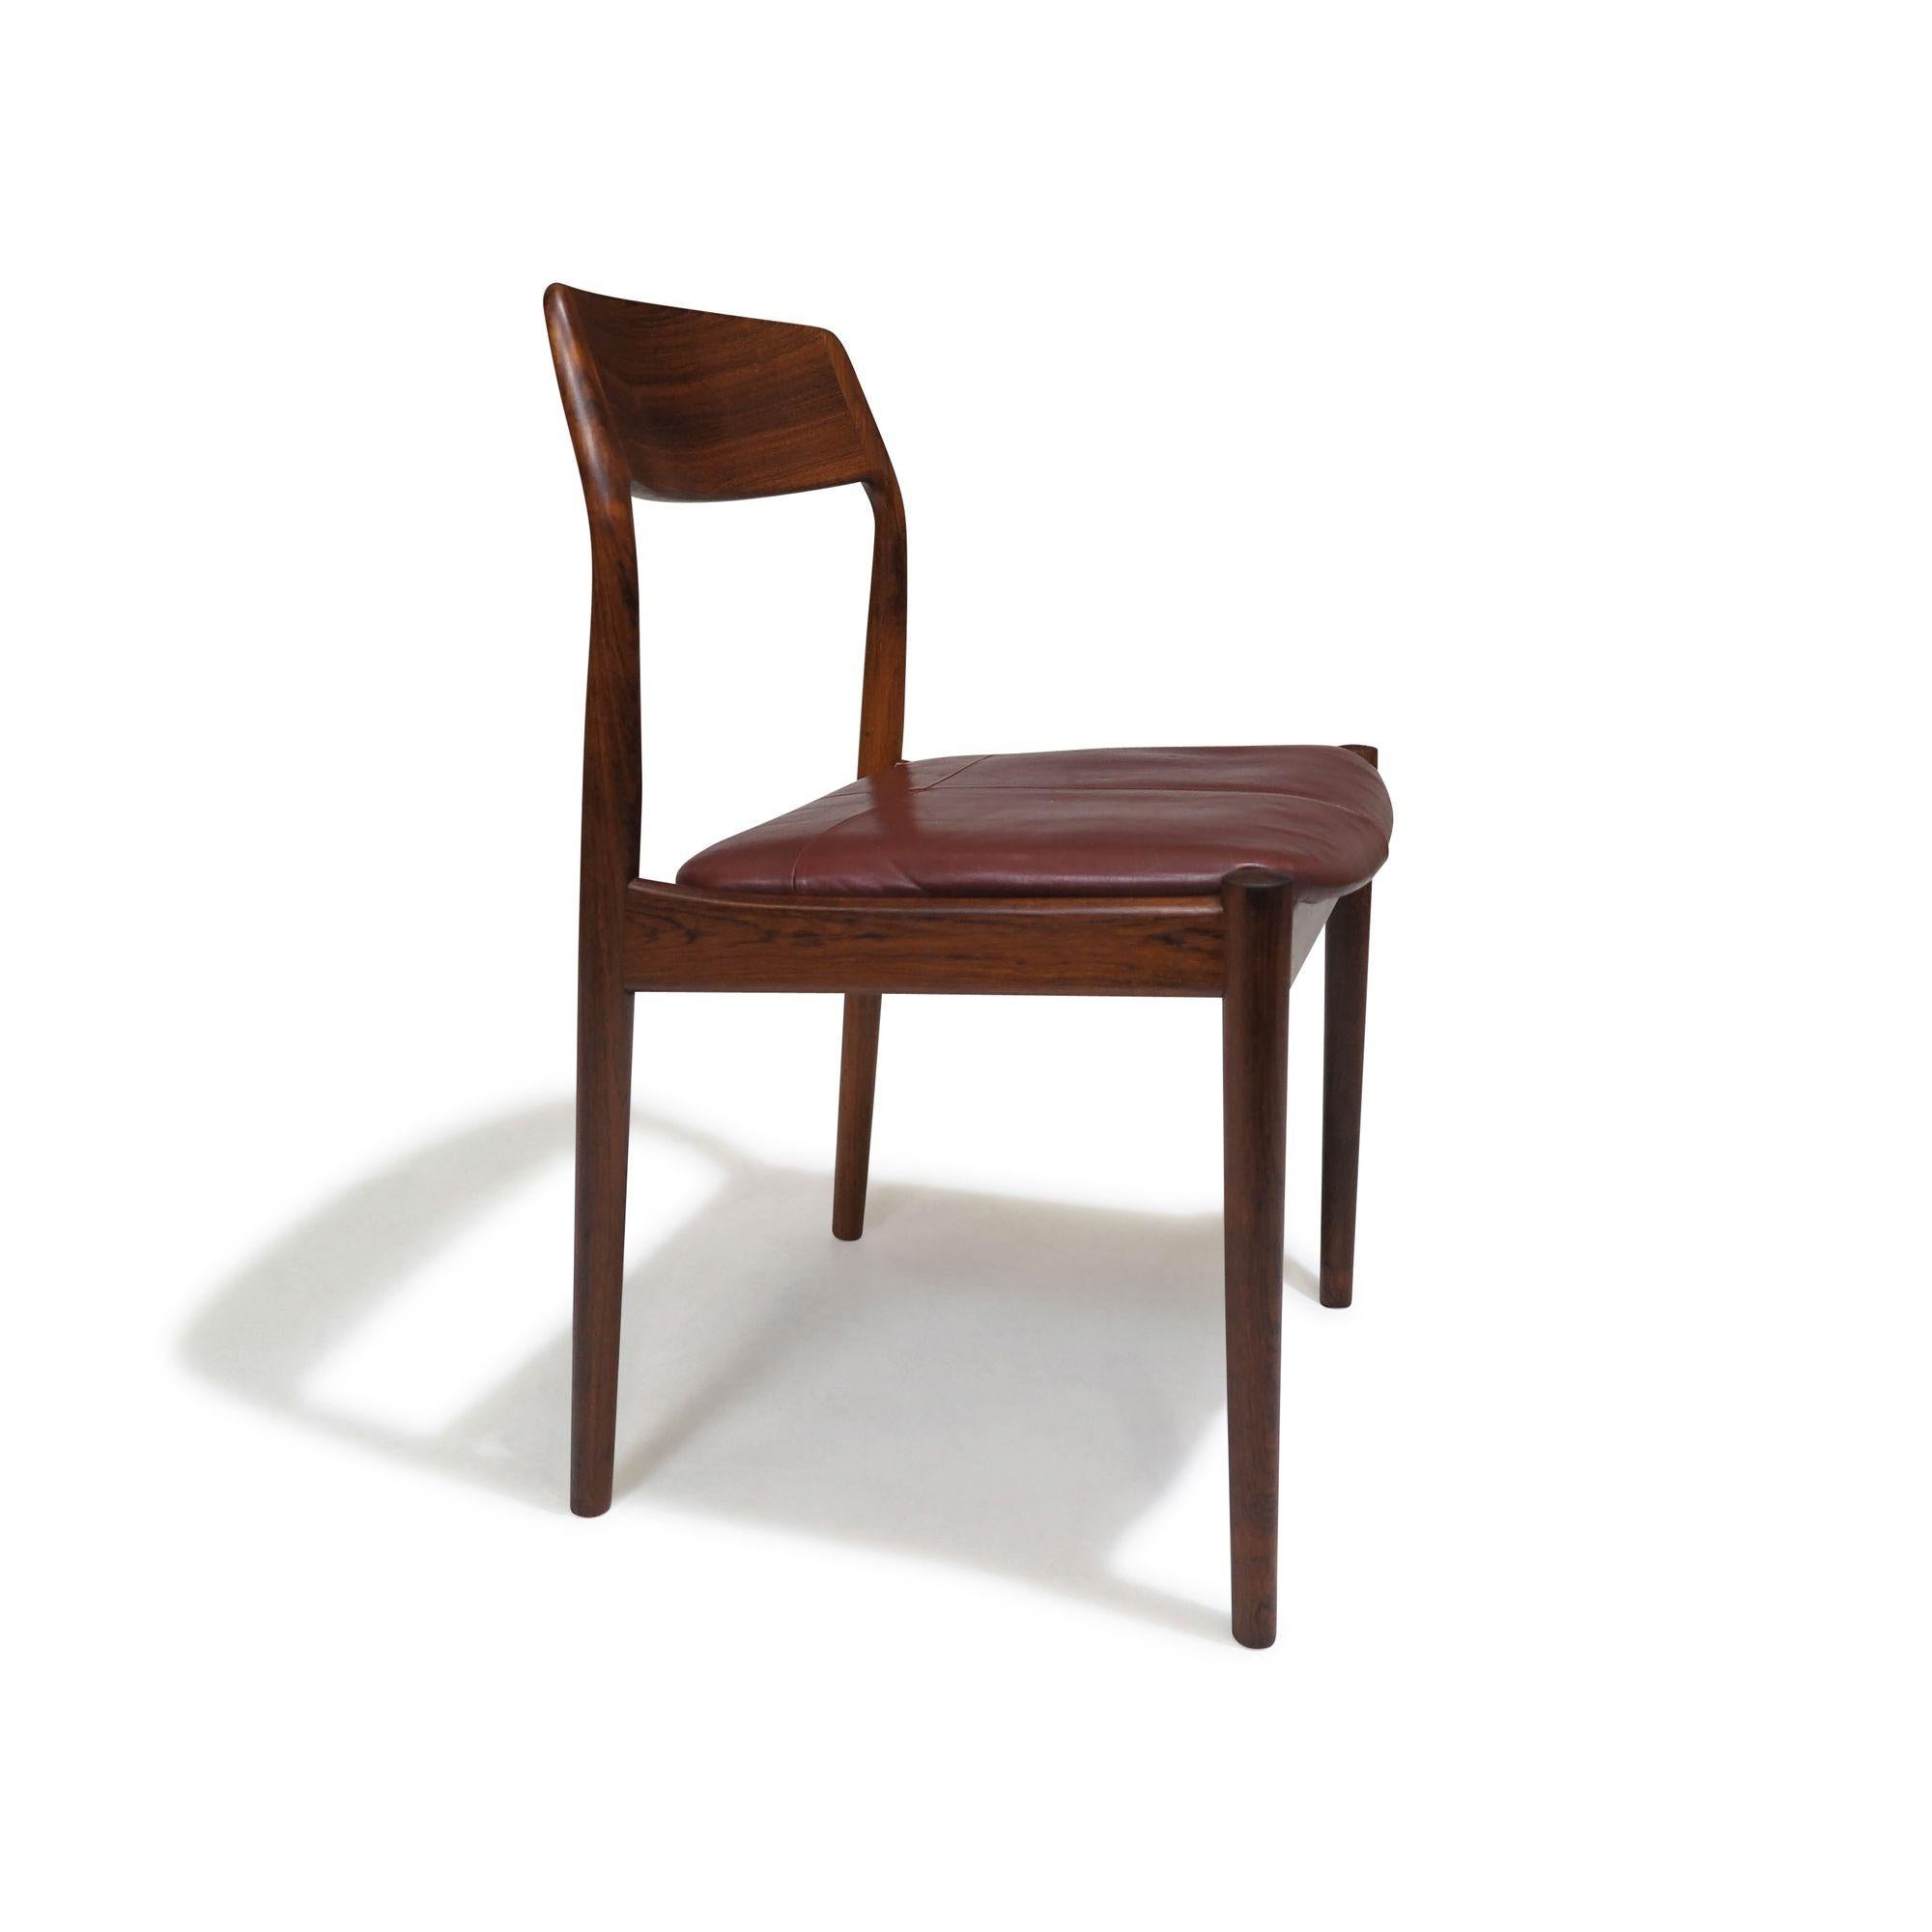 Set of 4 Mid-Century rosewood dining chairs, 1958, Denmark. Handcrafted from solid Brazilian rosewood, the frames feature comfortable angled backrests and are upholstered in patinated burgundy leather with a patchwork pattern. The chair frames have